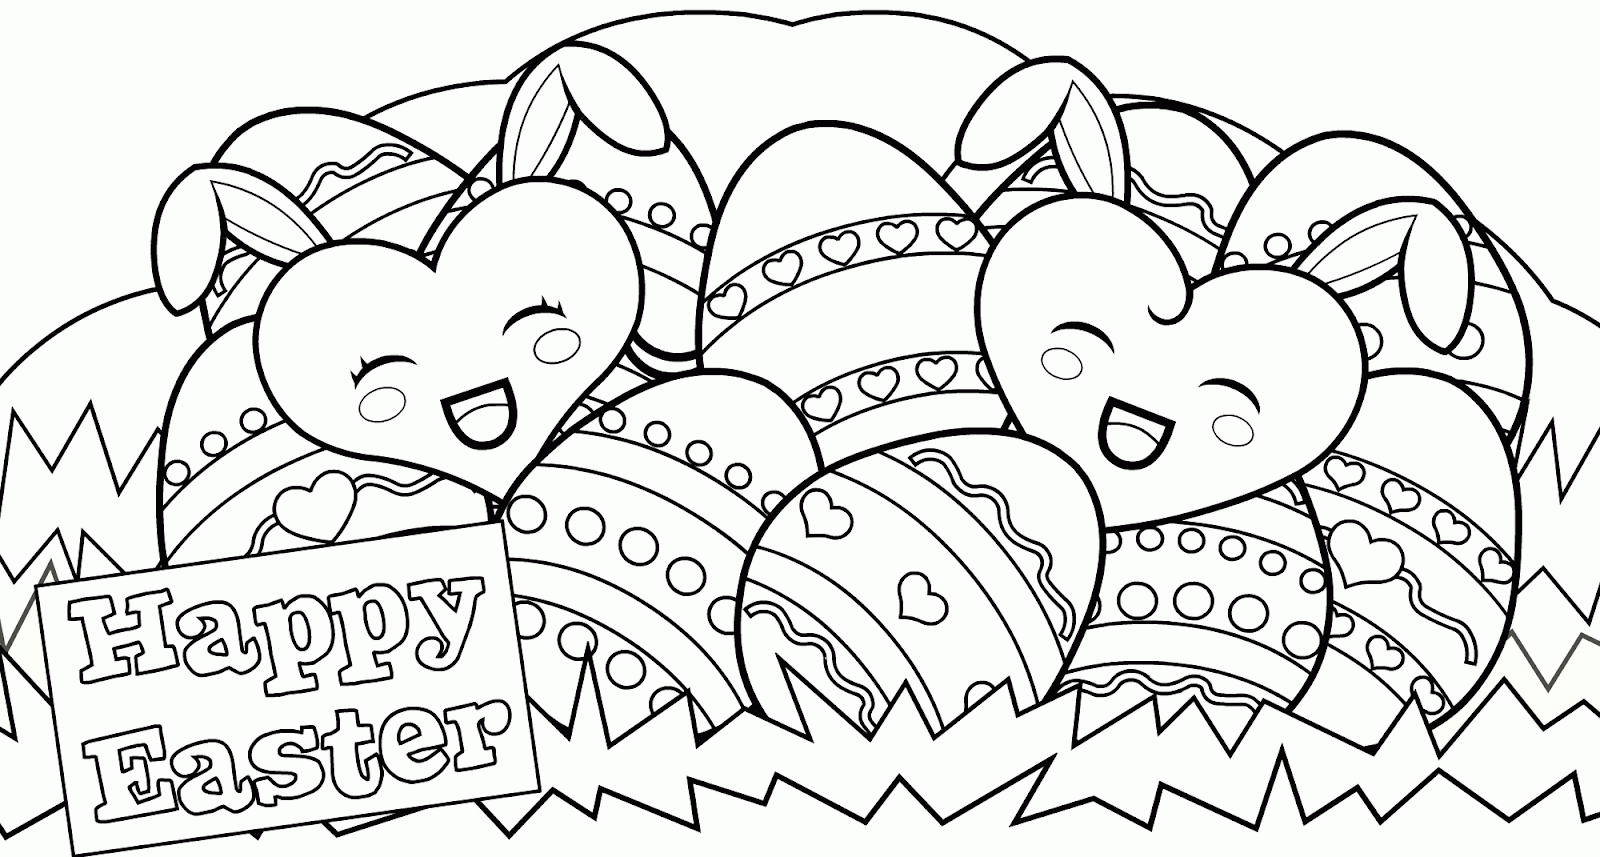 Coloring Pages Zentangle Easter Eggs For Coloring Book For Adult ...